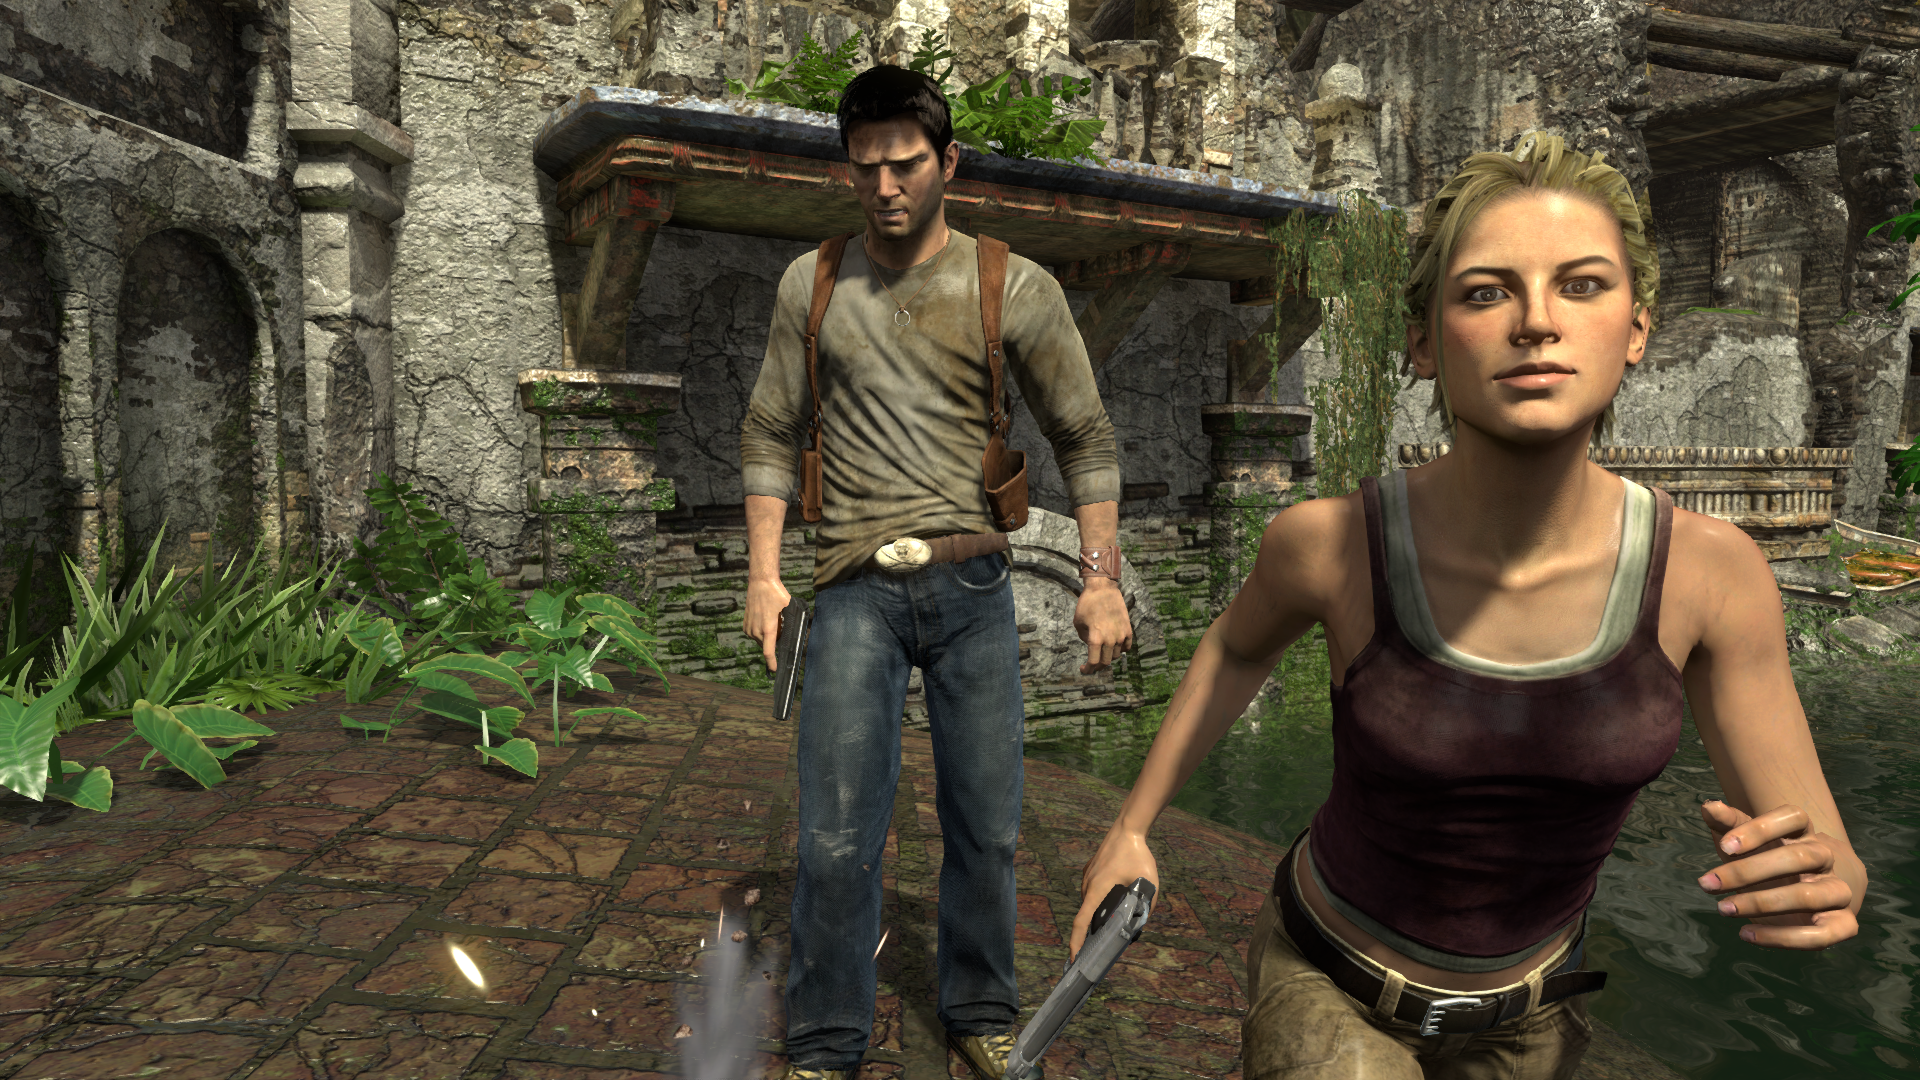 Uncharted 1: Drake's Fortune (The Movie) 